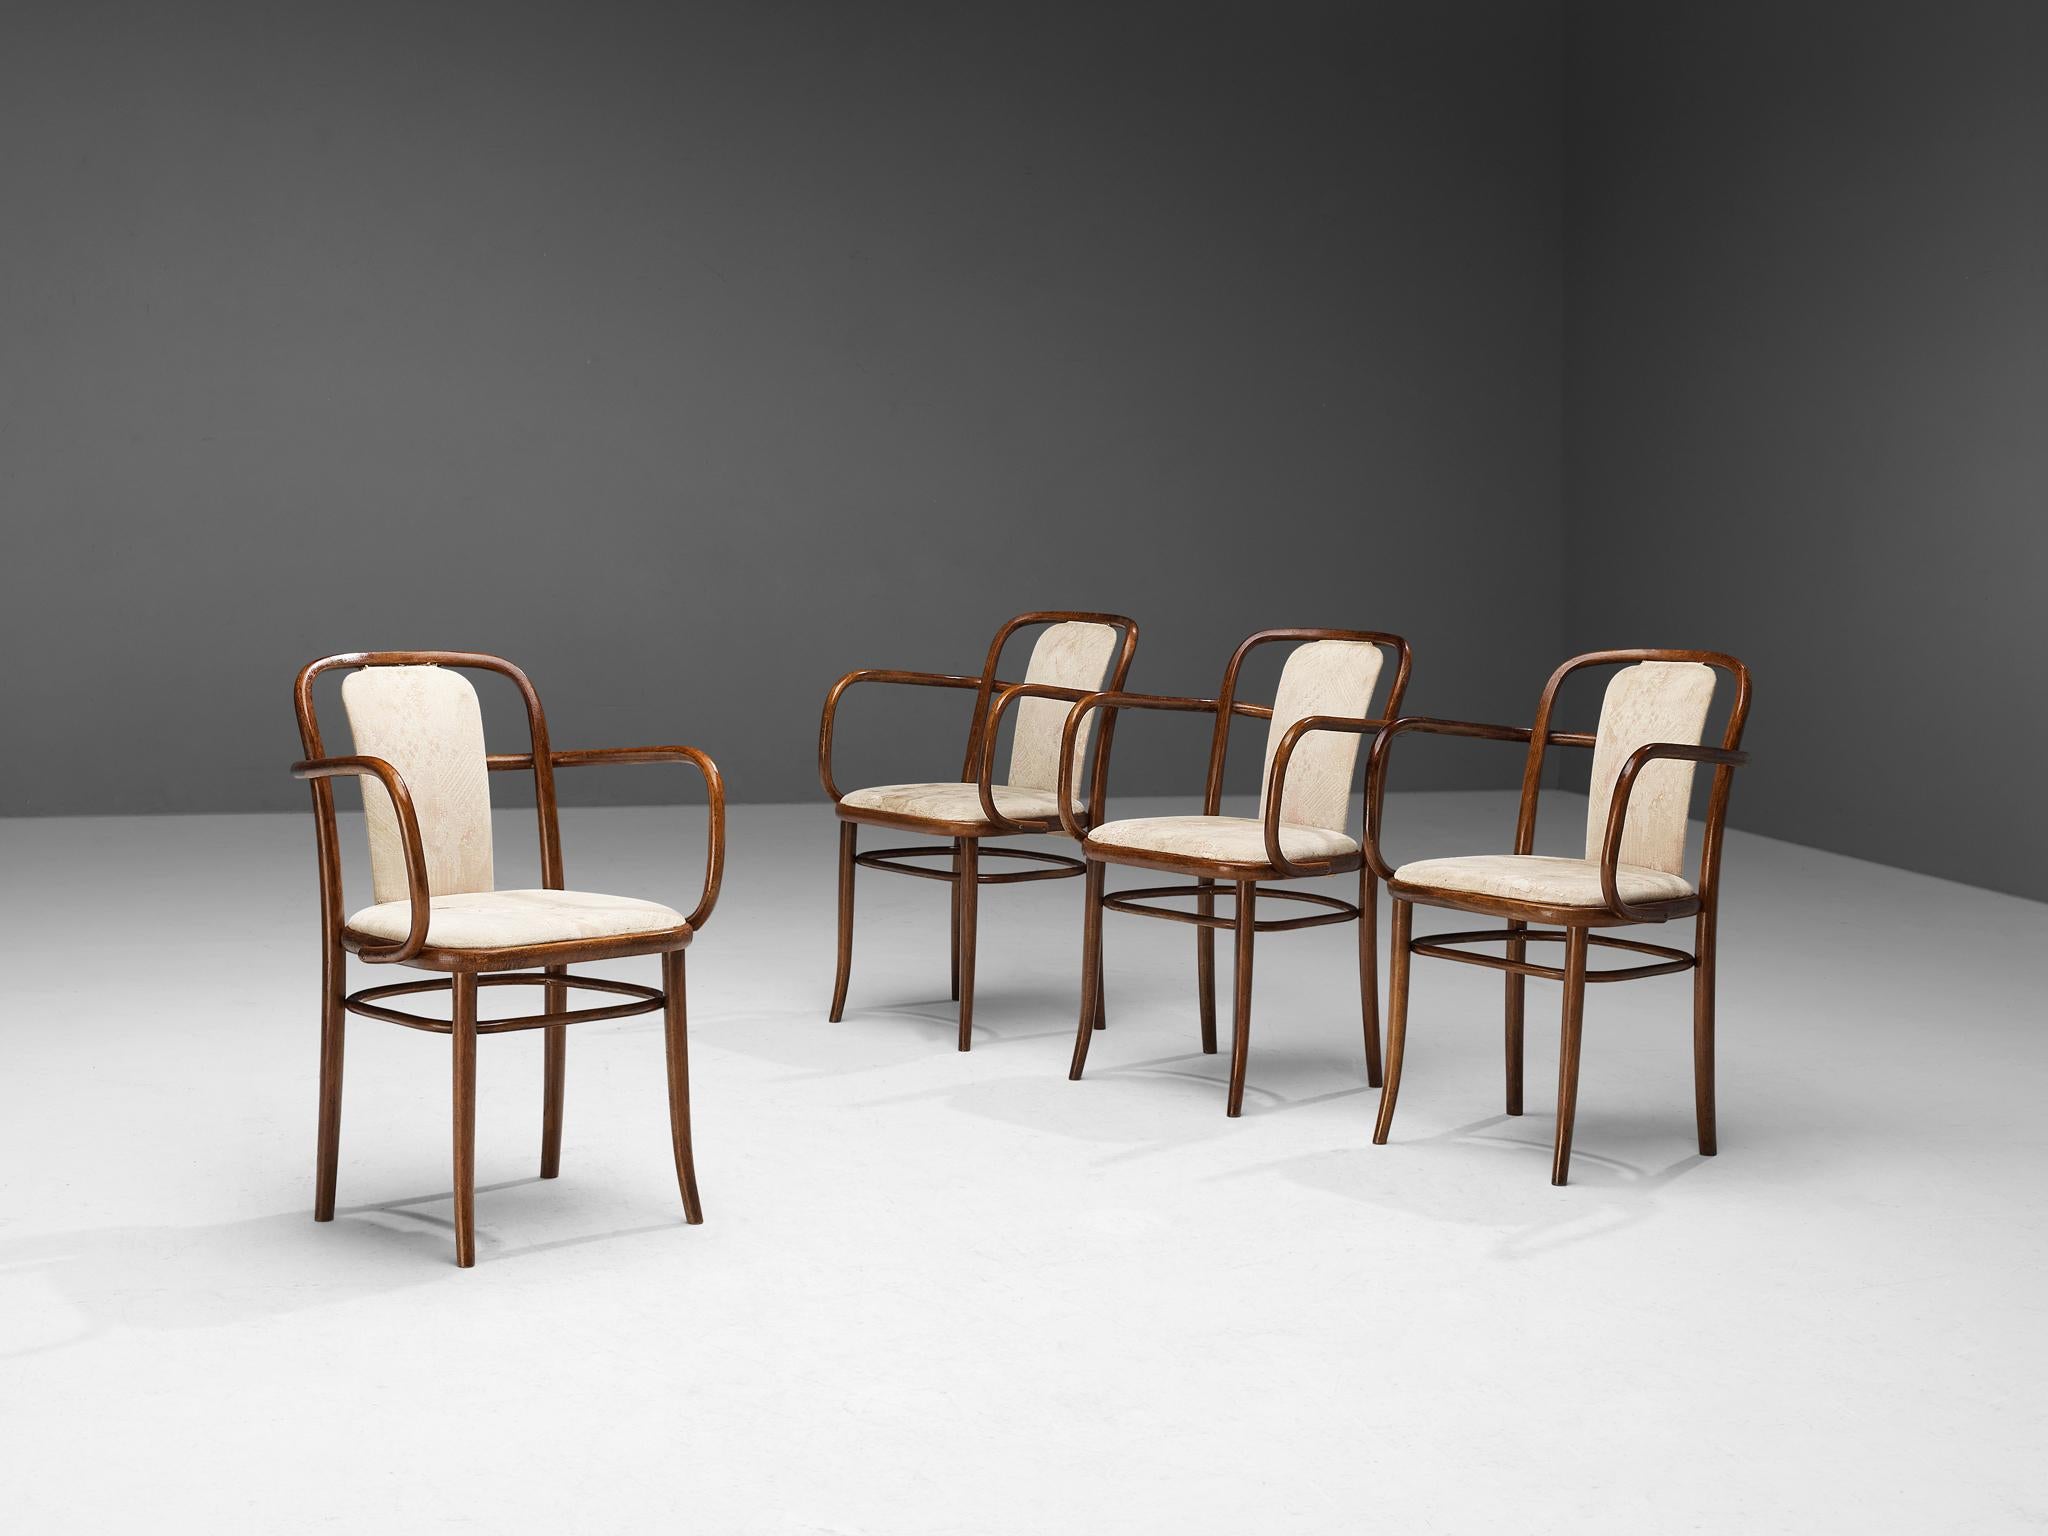 - Set of (4) chairs
- In current condition 